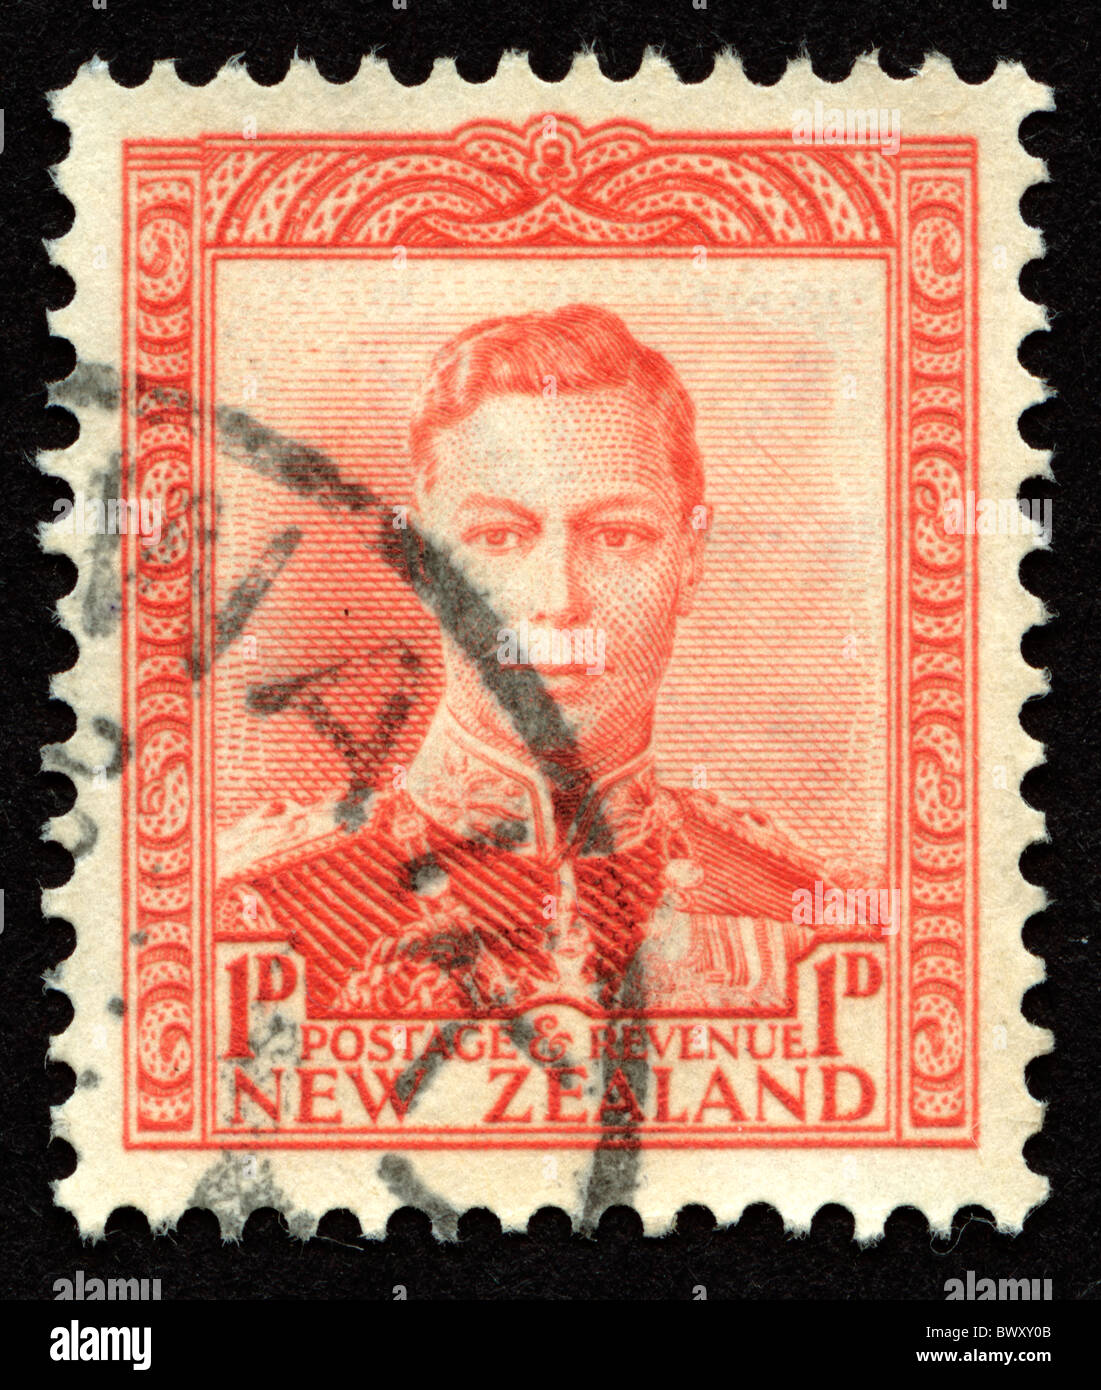 Vintage postage stamp from New Zealand Stock Photo